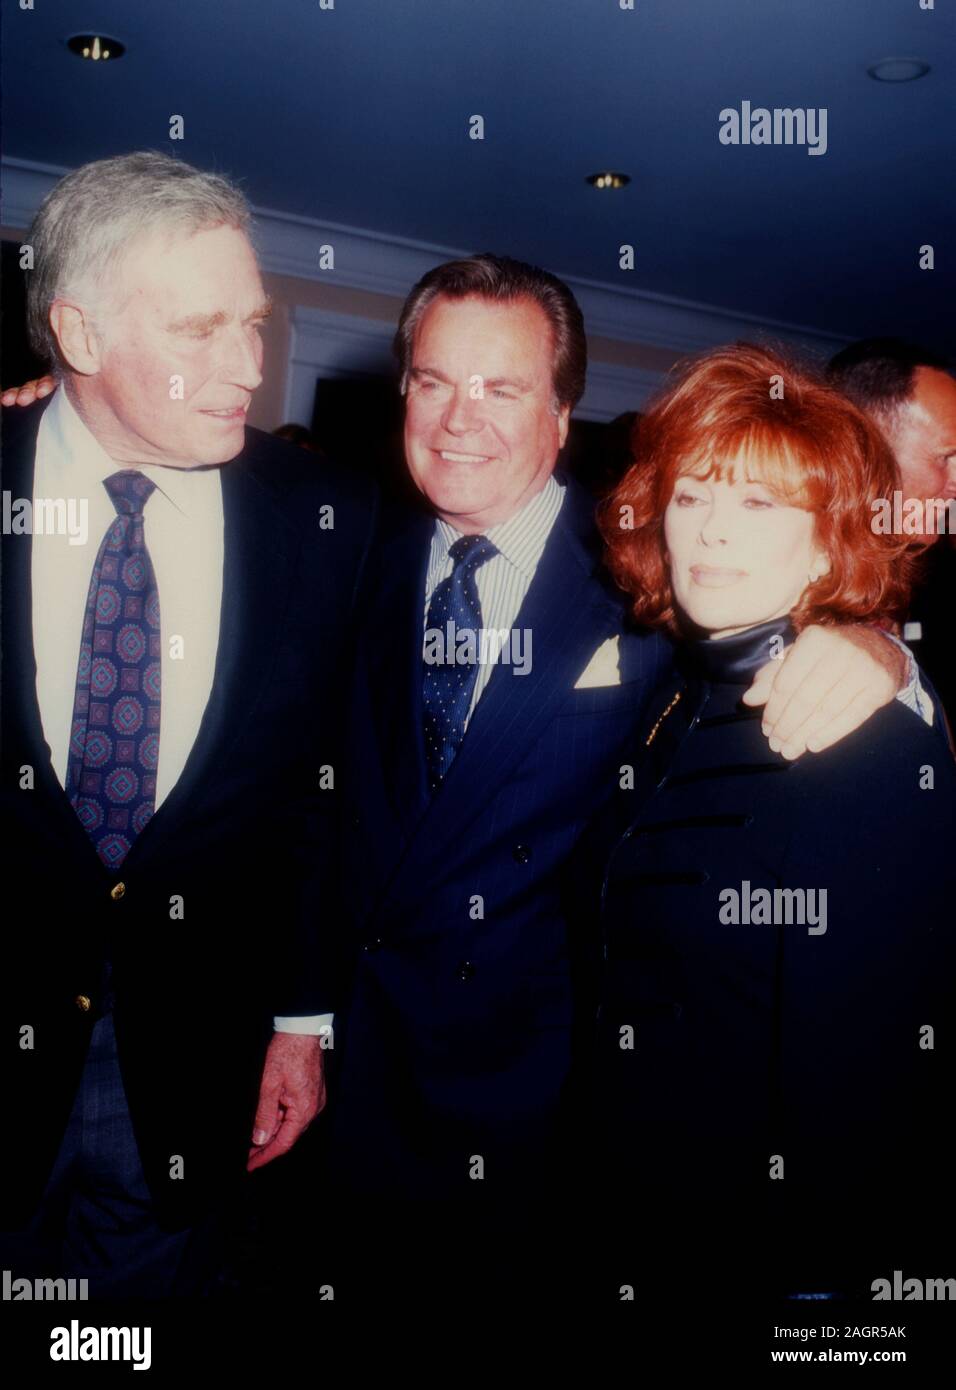 Beverly Hills, California, USA 6th April 1995 (L-R) Actor Charlton Heston, actor Robert Wagner and actress Jill St. John attend Jimmy Stewart Marathon and St. John's Hospital Benefit on April 6, 1995 at the Beverly Hills Hotel in Beverly Hills, California, USA. Photo by Barry King/Alamy Stock Photo Stock Photo